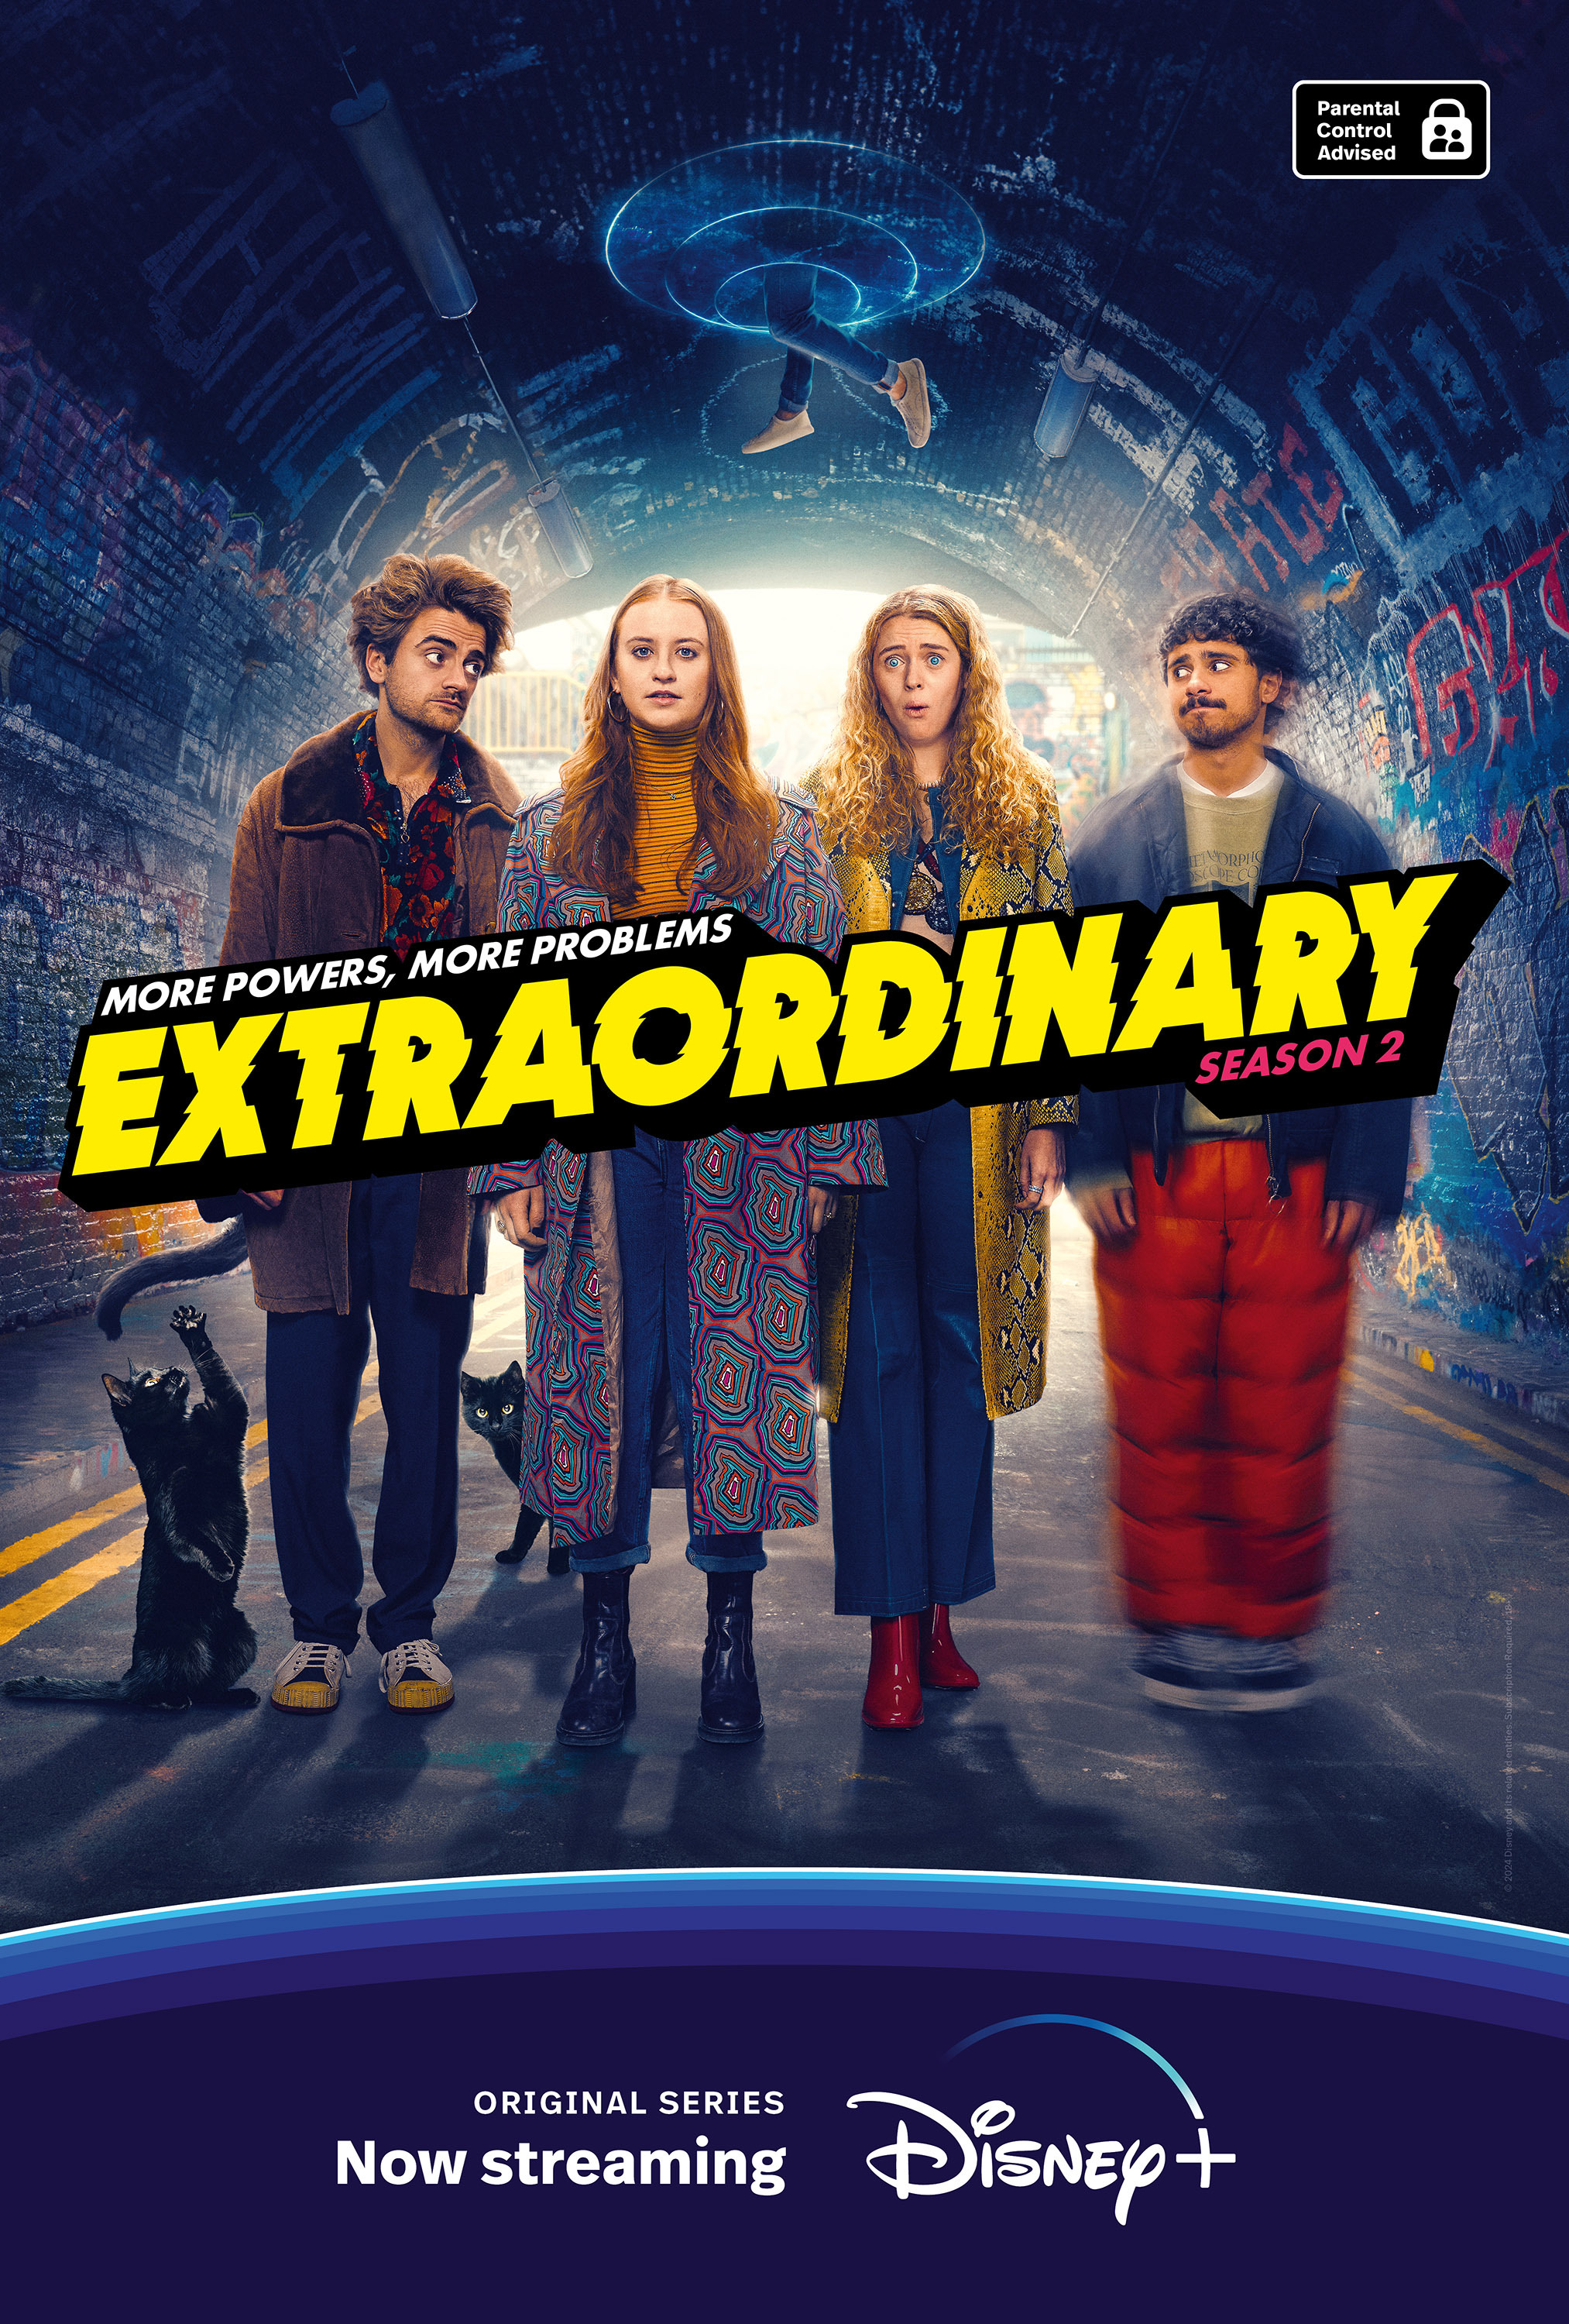 Mega Sized TV Poster Image for Extraordinary (#3 of 3)